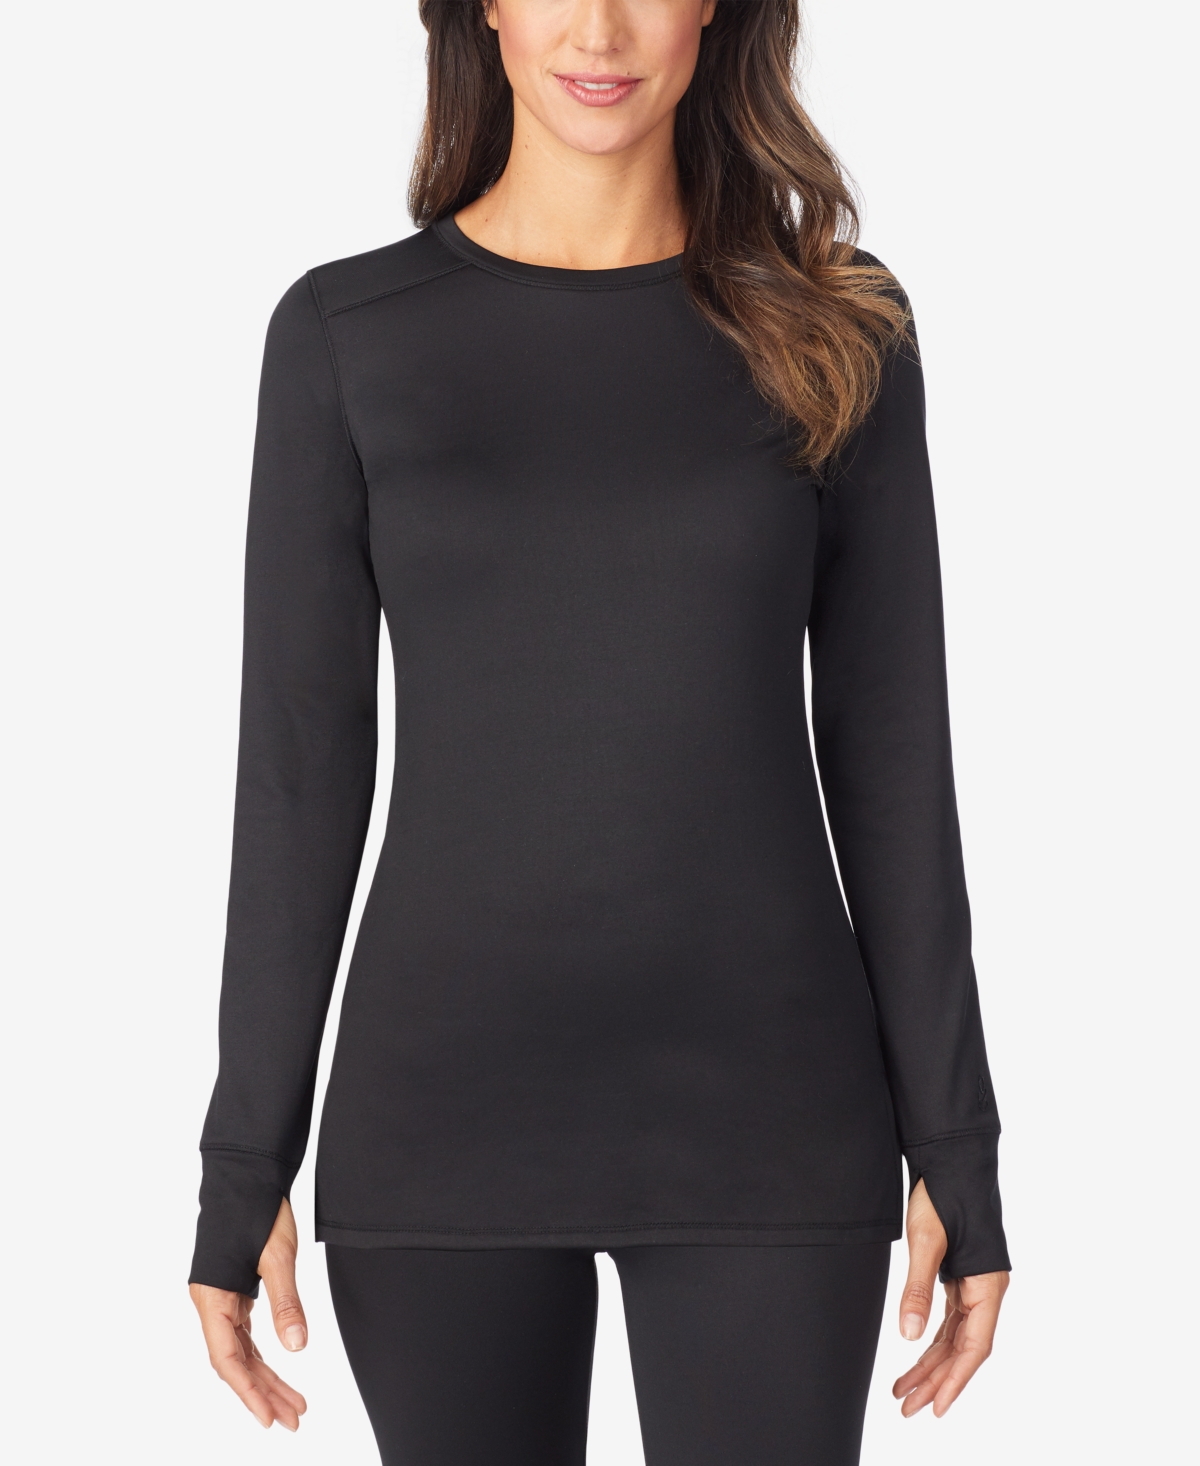 CUDDL DUDS WOMEN'S THERMAWEAR LONG SLEEVE TOP